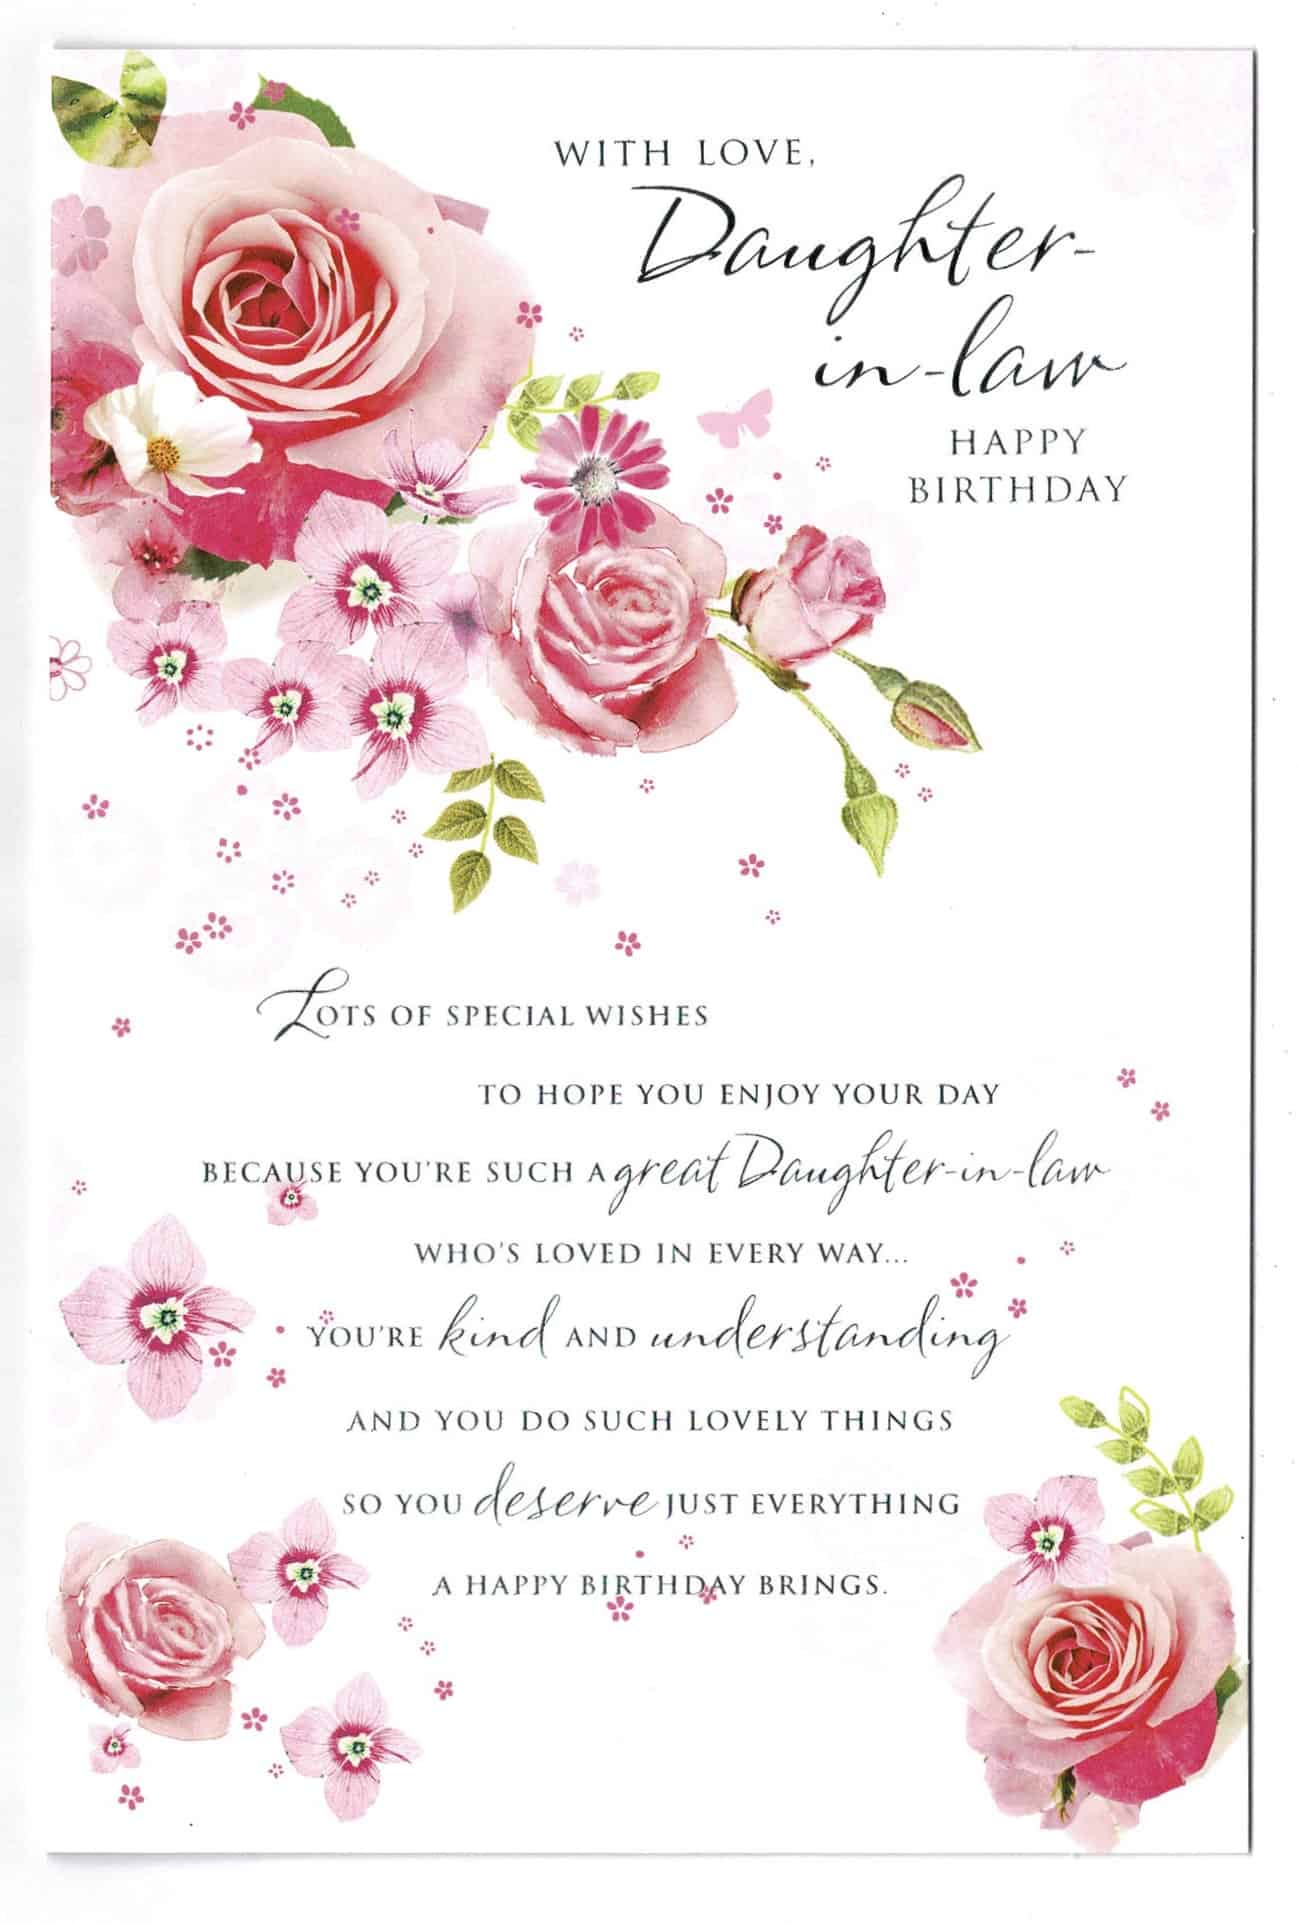 Daughter In Law Birthday Card With Rose And Sentiment Verse Design With Love Gifts Cards